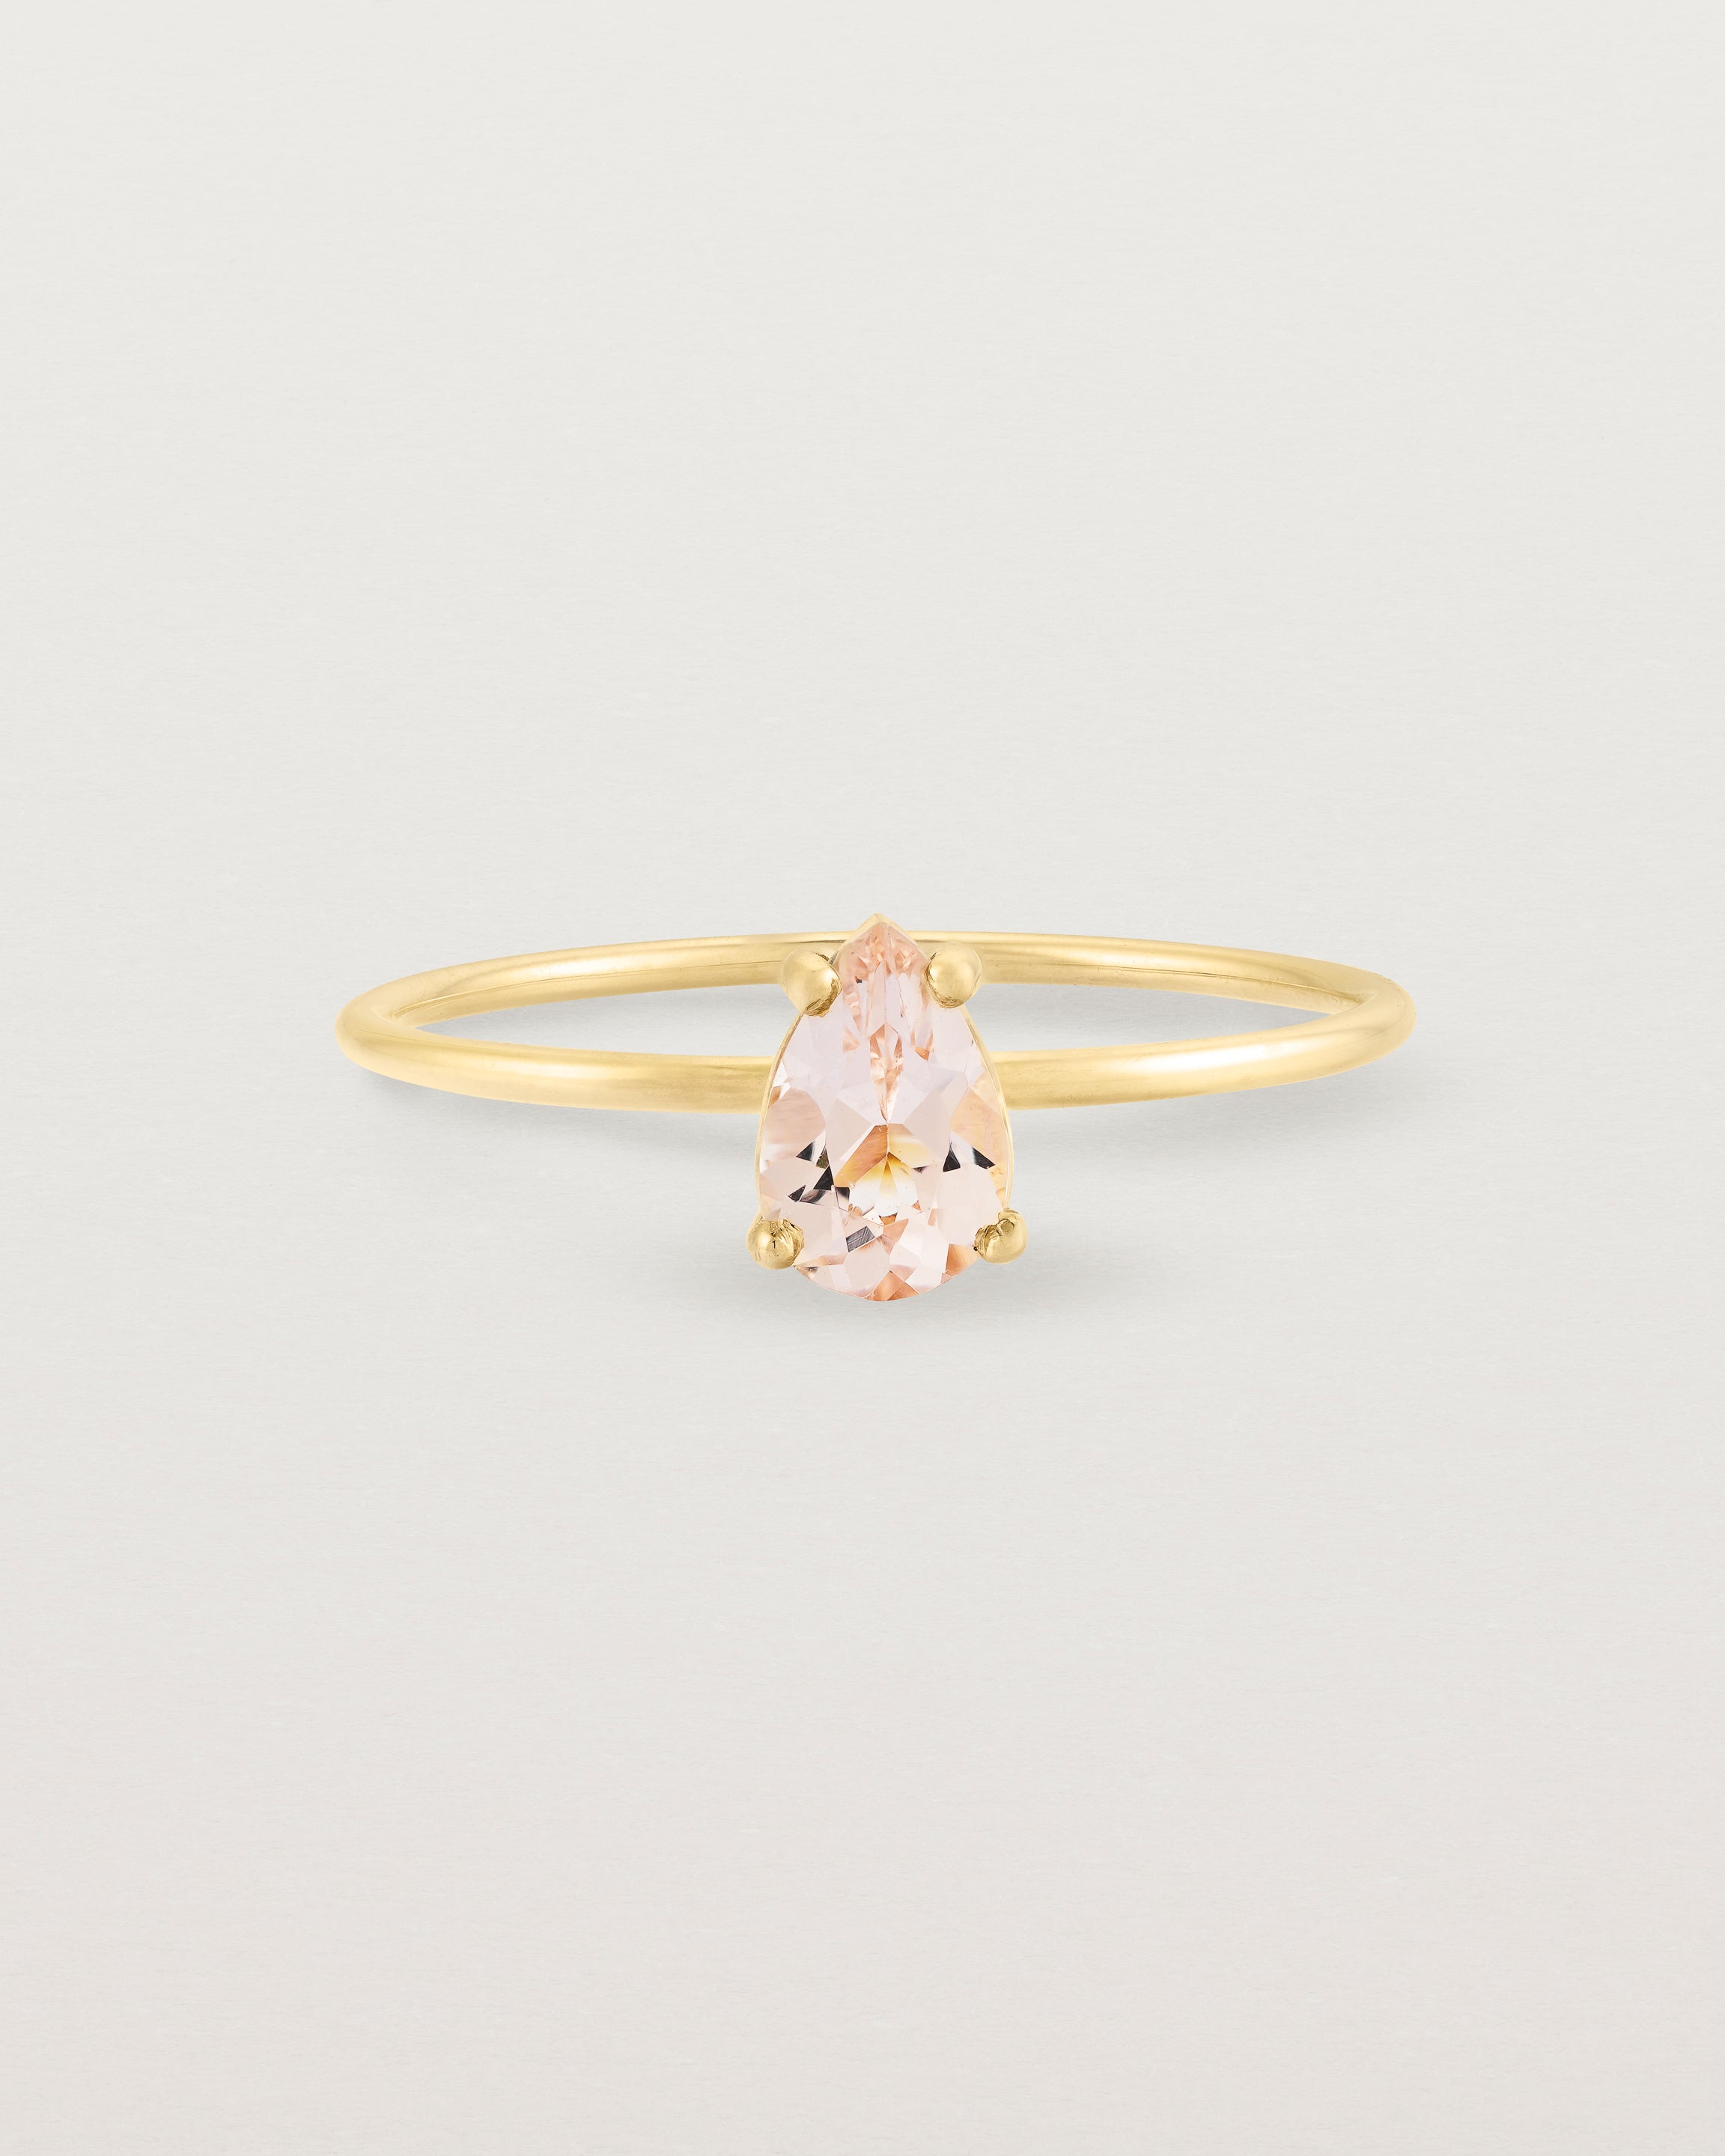 A fine yellow gold ring featuring a pear shaped pink morganite stone